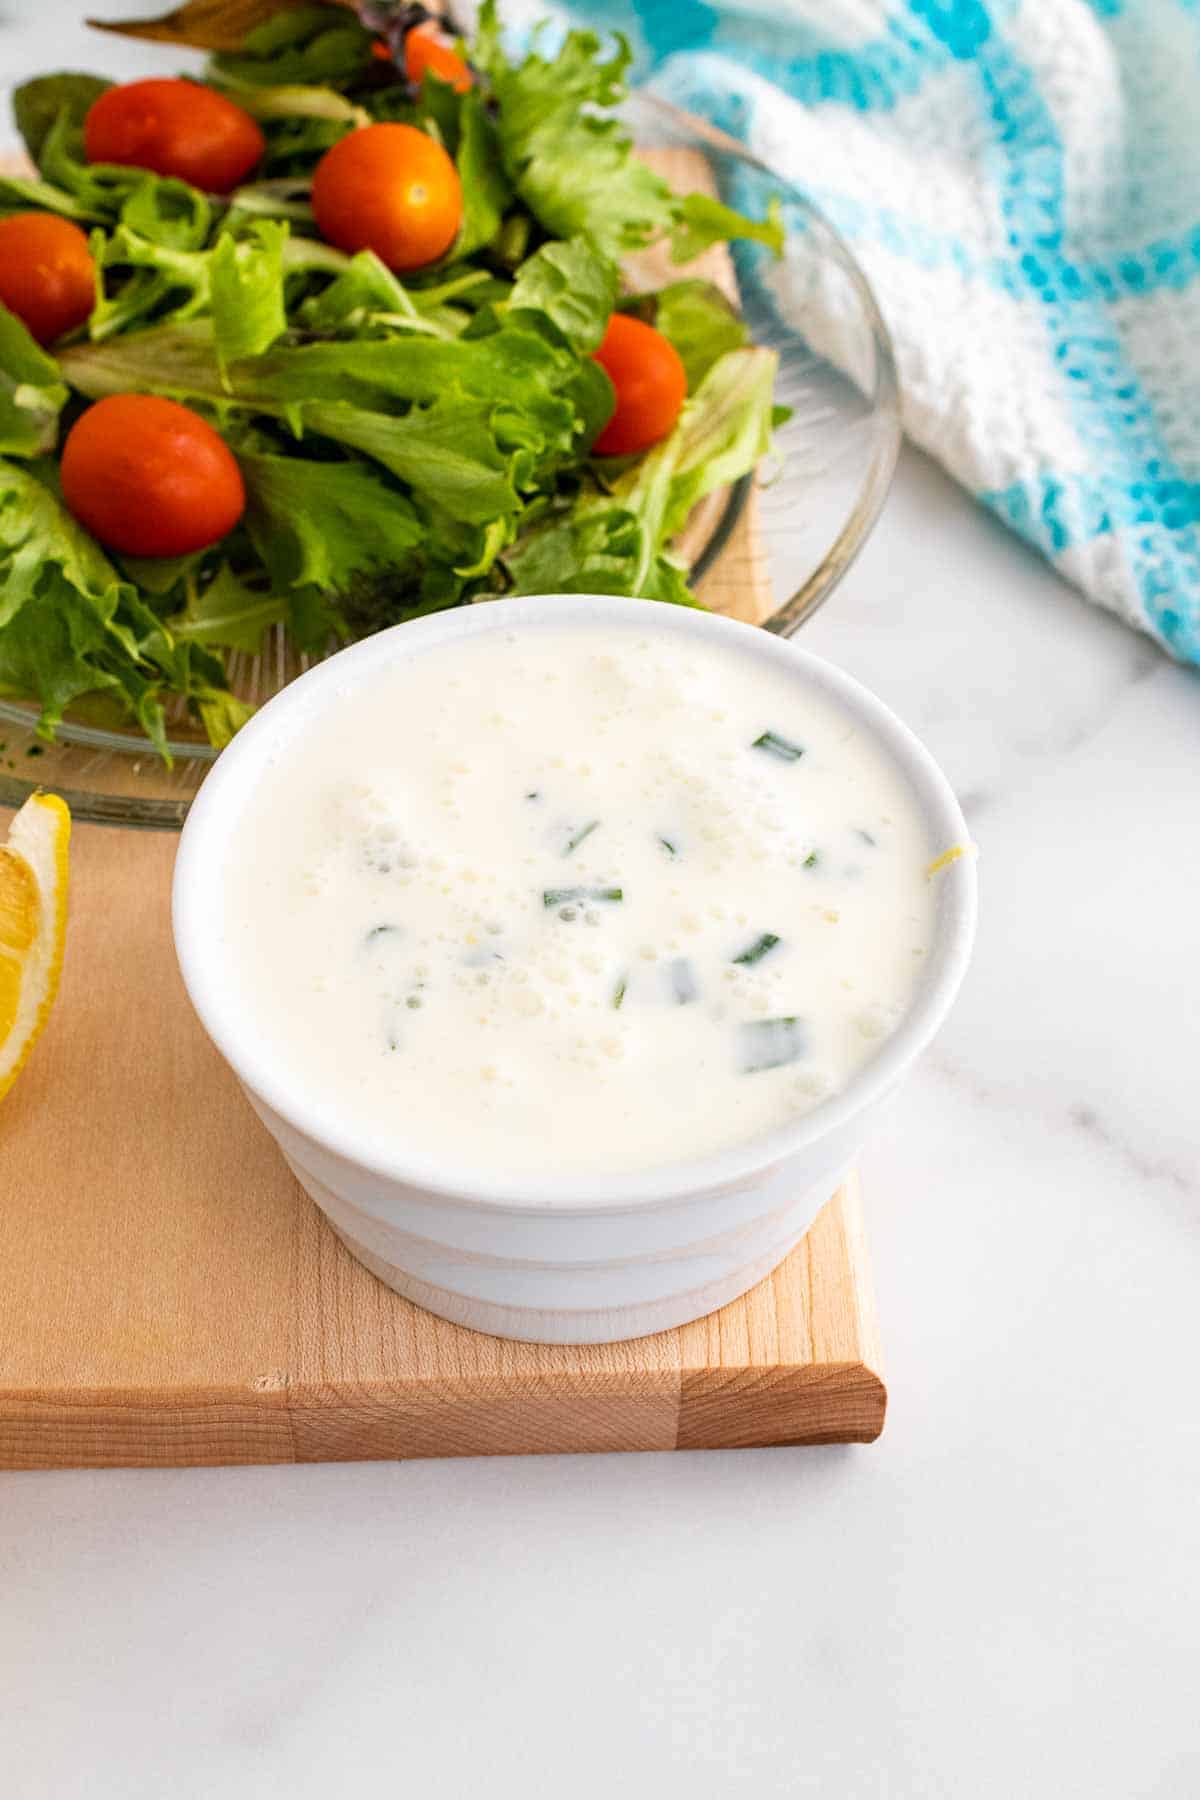 Creamy Lemon-Chive Dressing in a white ramekin on a wooden serving tray next to a wedge of lemon and a fresh salad with dressing on top